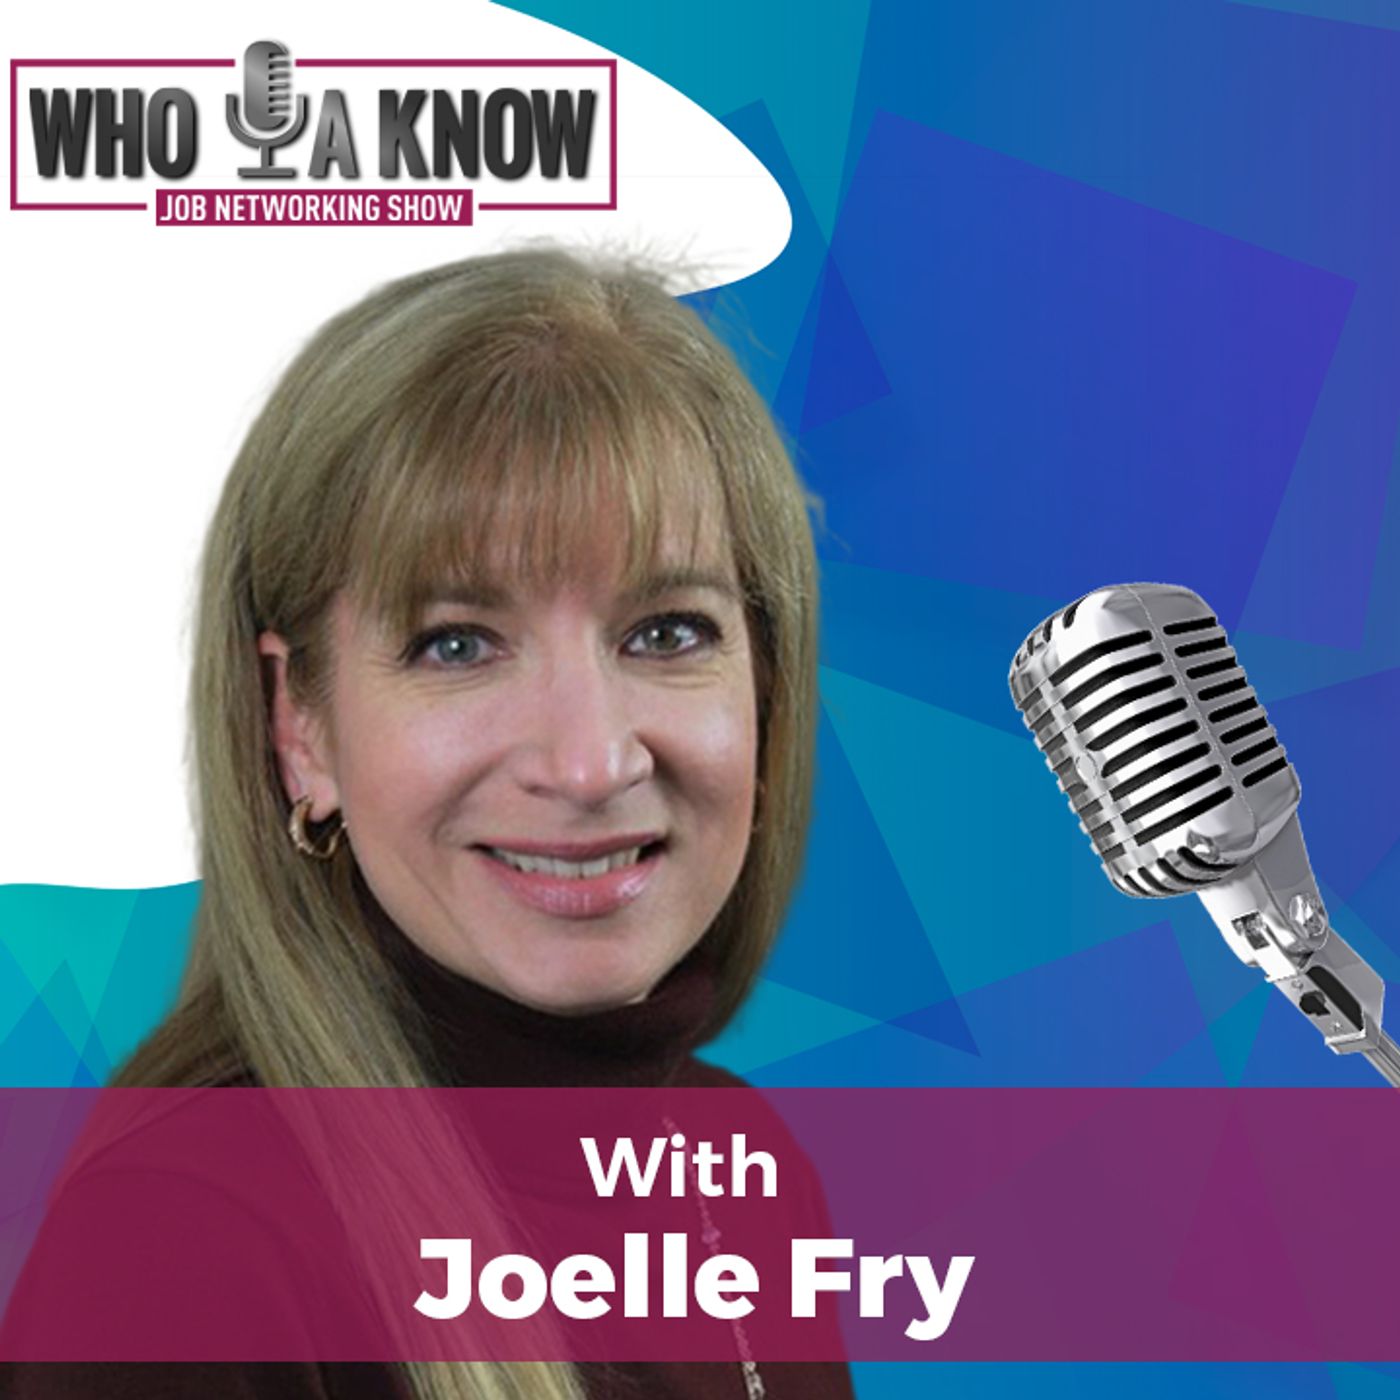 It’s All About Who You Know w/ Joelle Fry